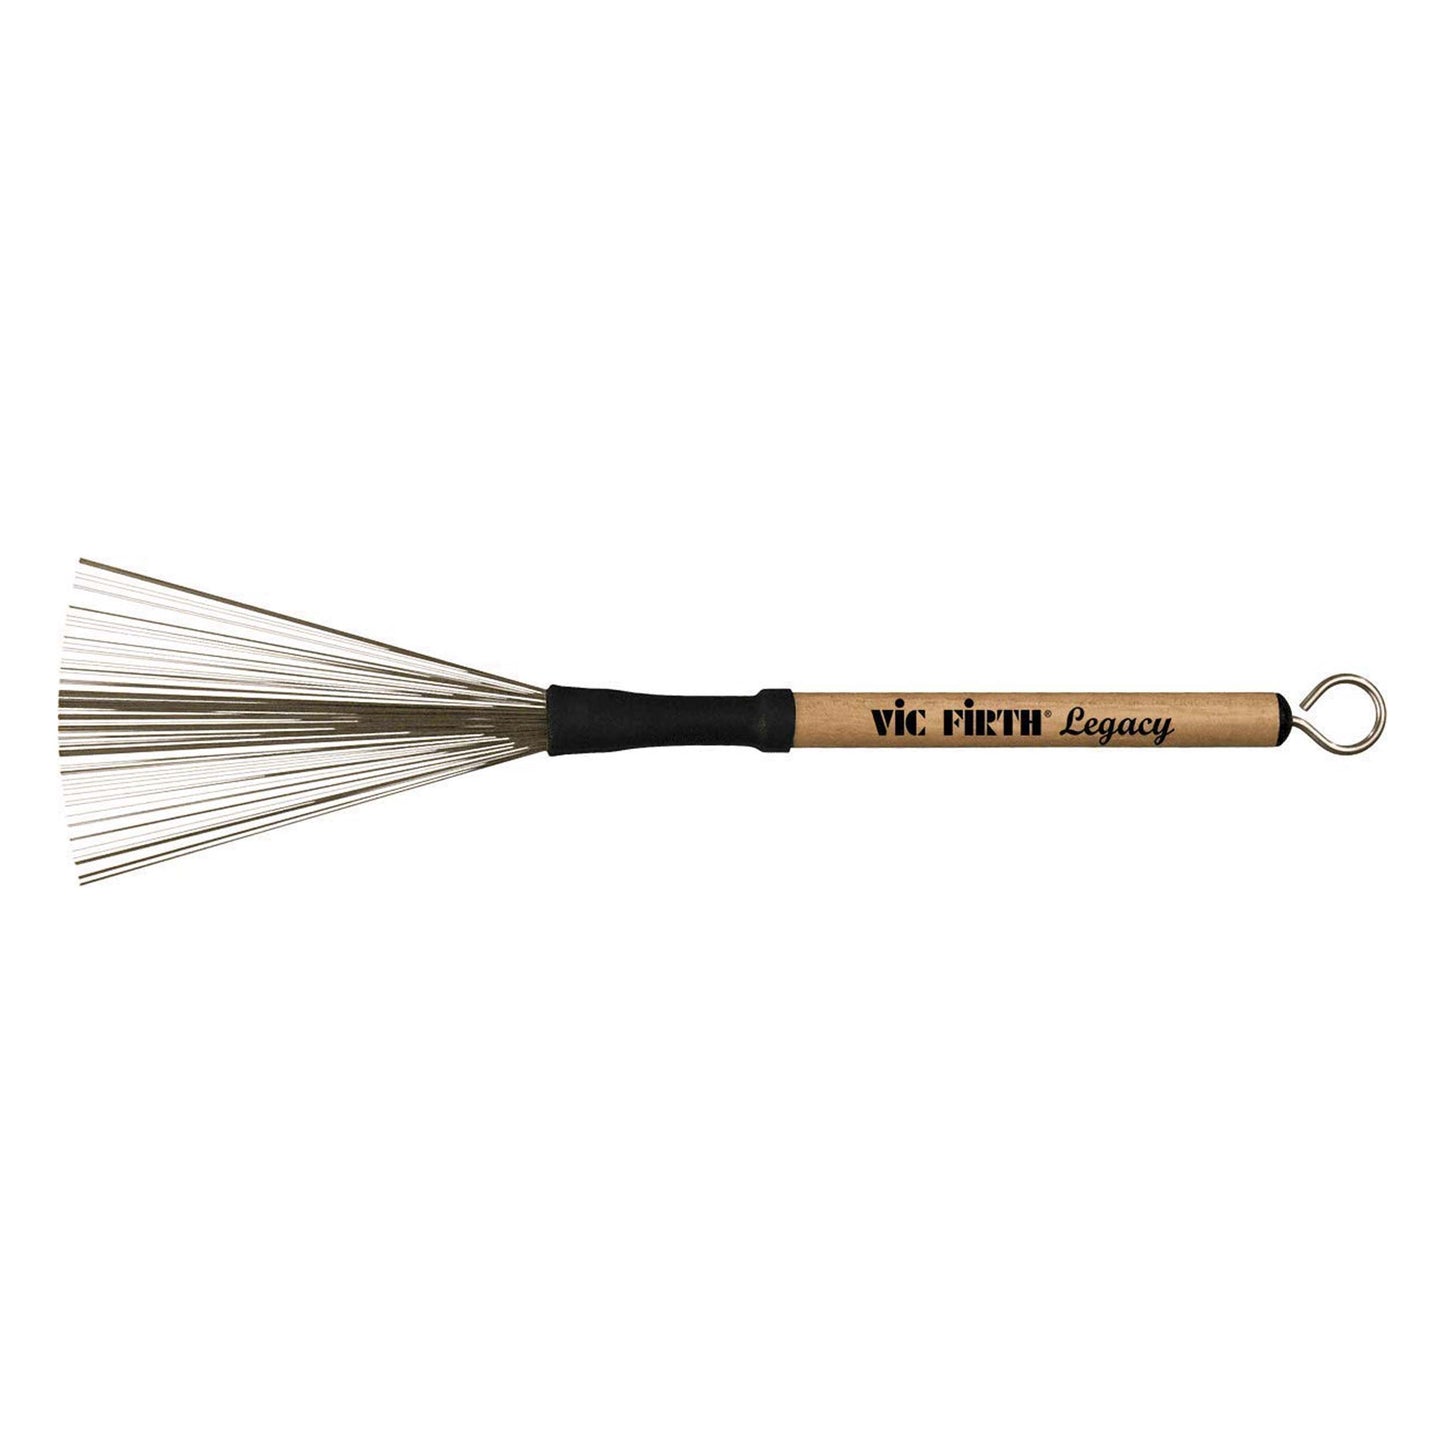 Vic Firth Legacy Wood Handle Retractable Brushes